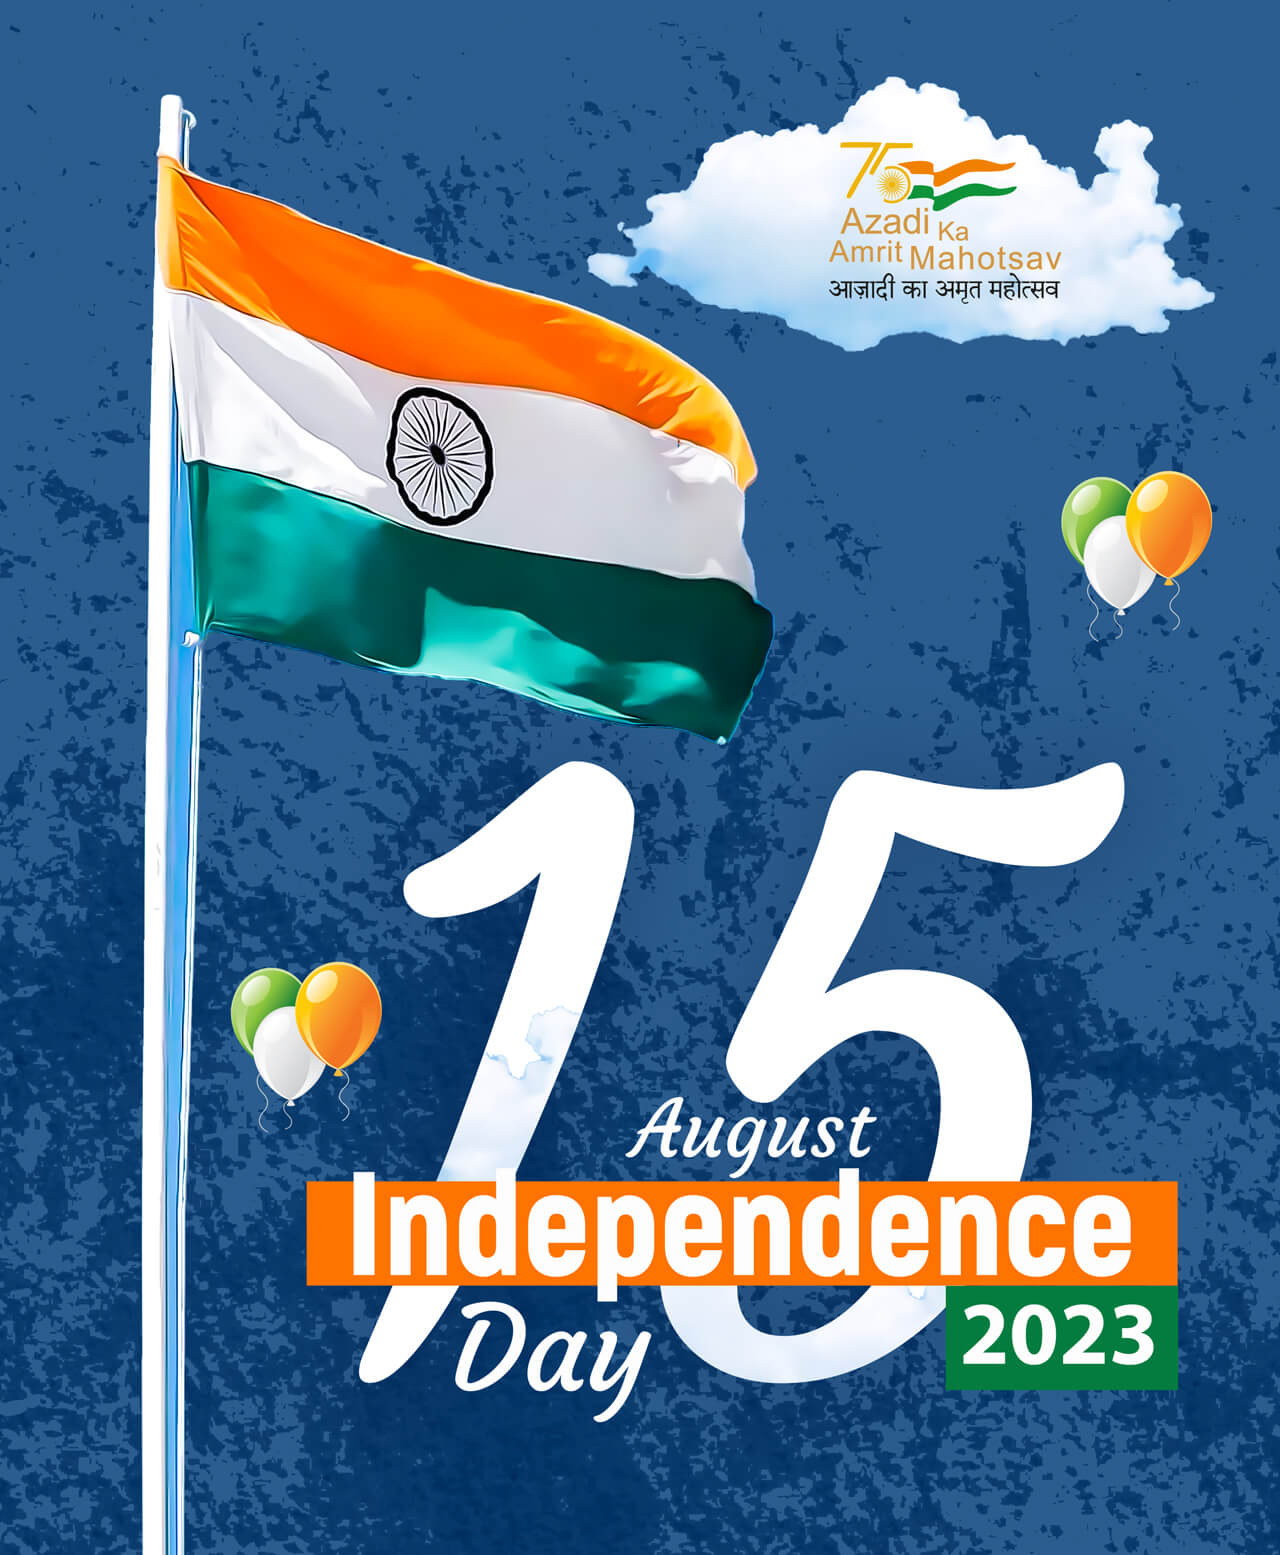 2023 Independence Day Images Download